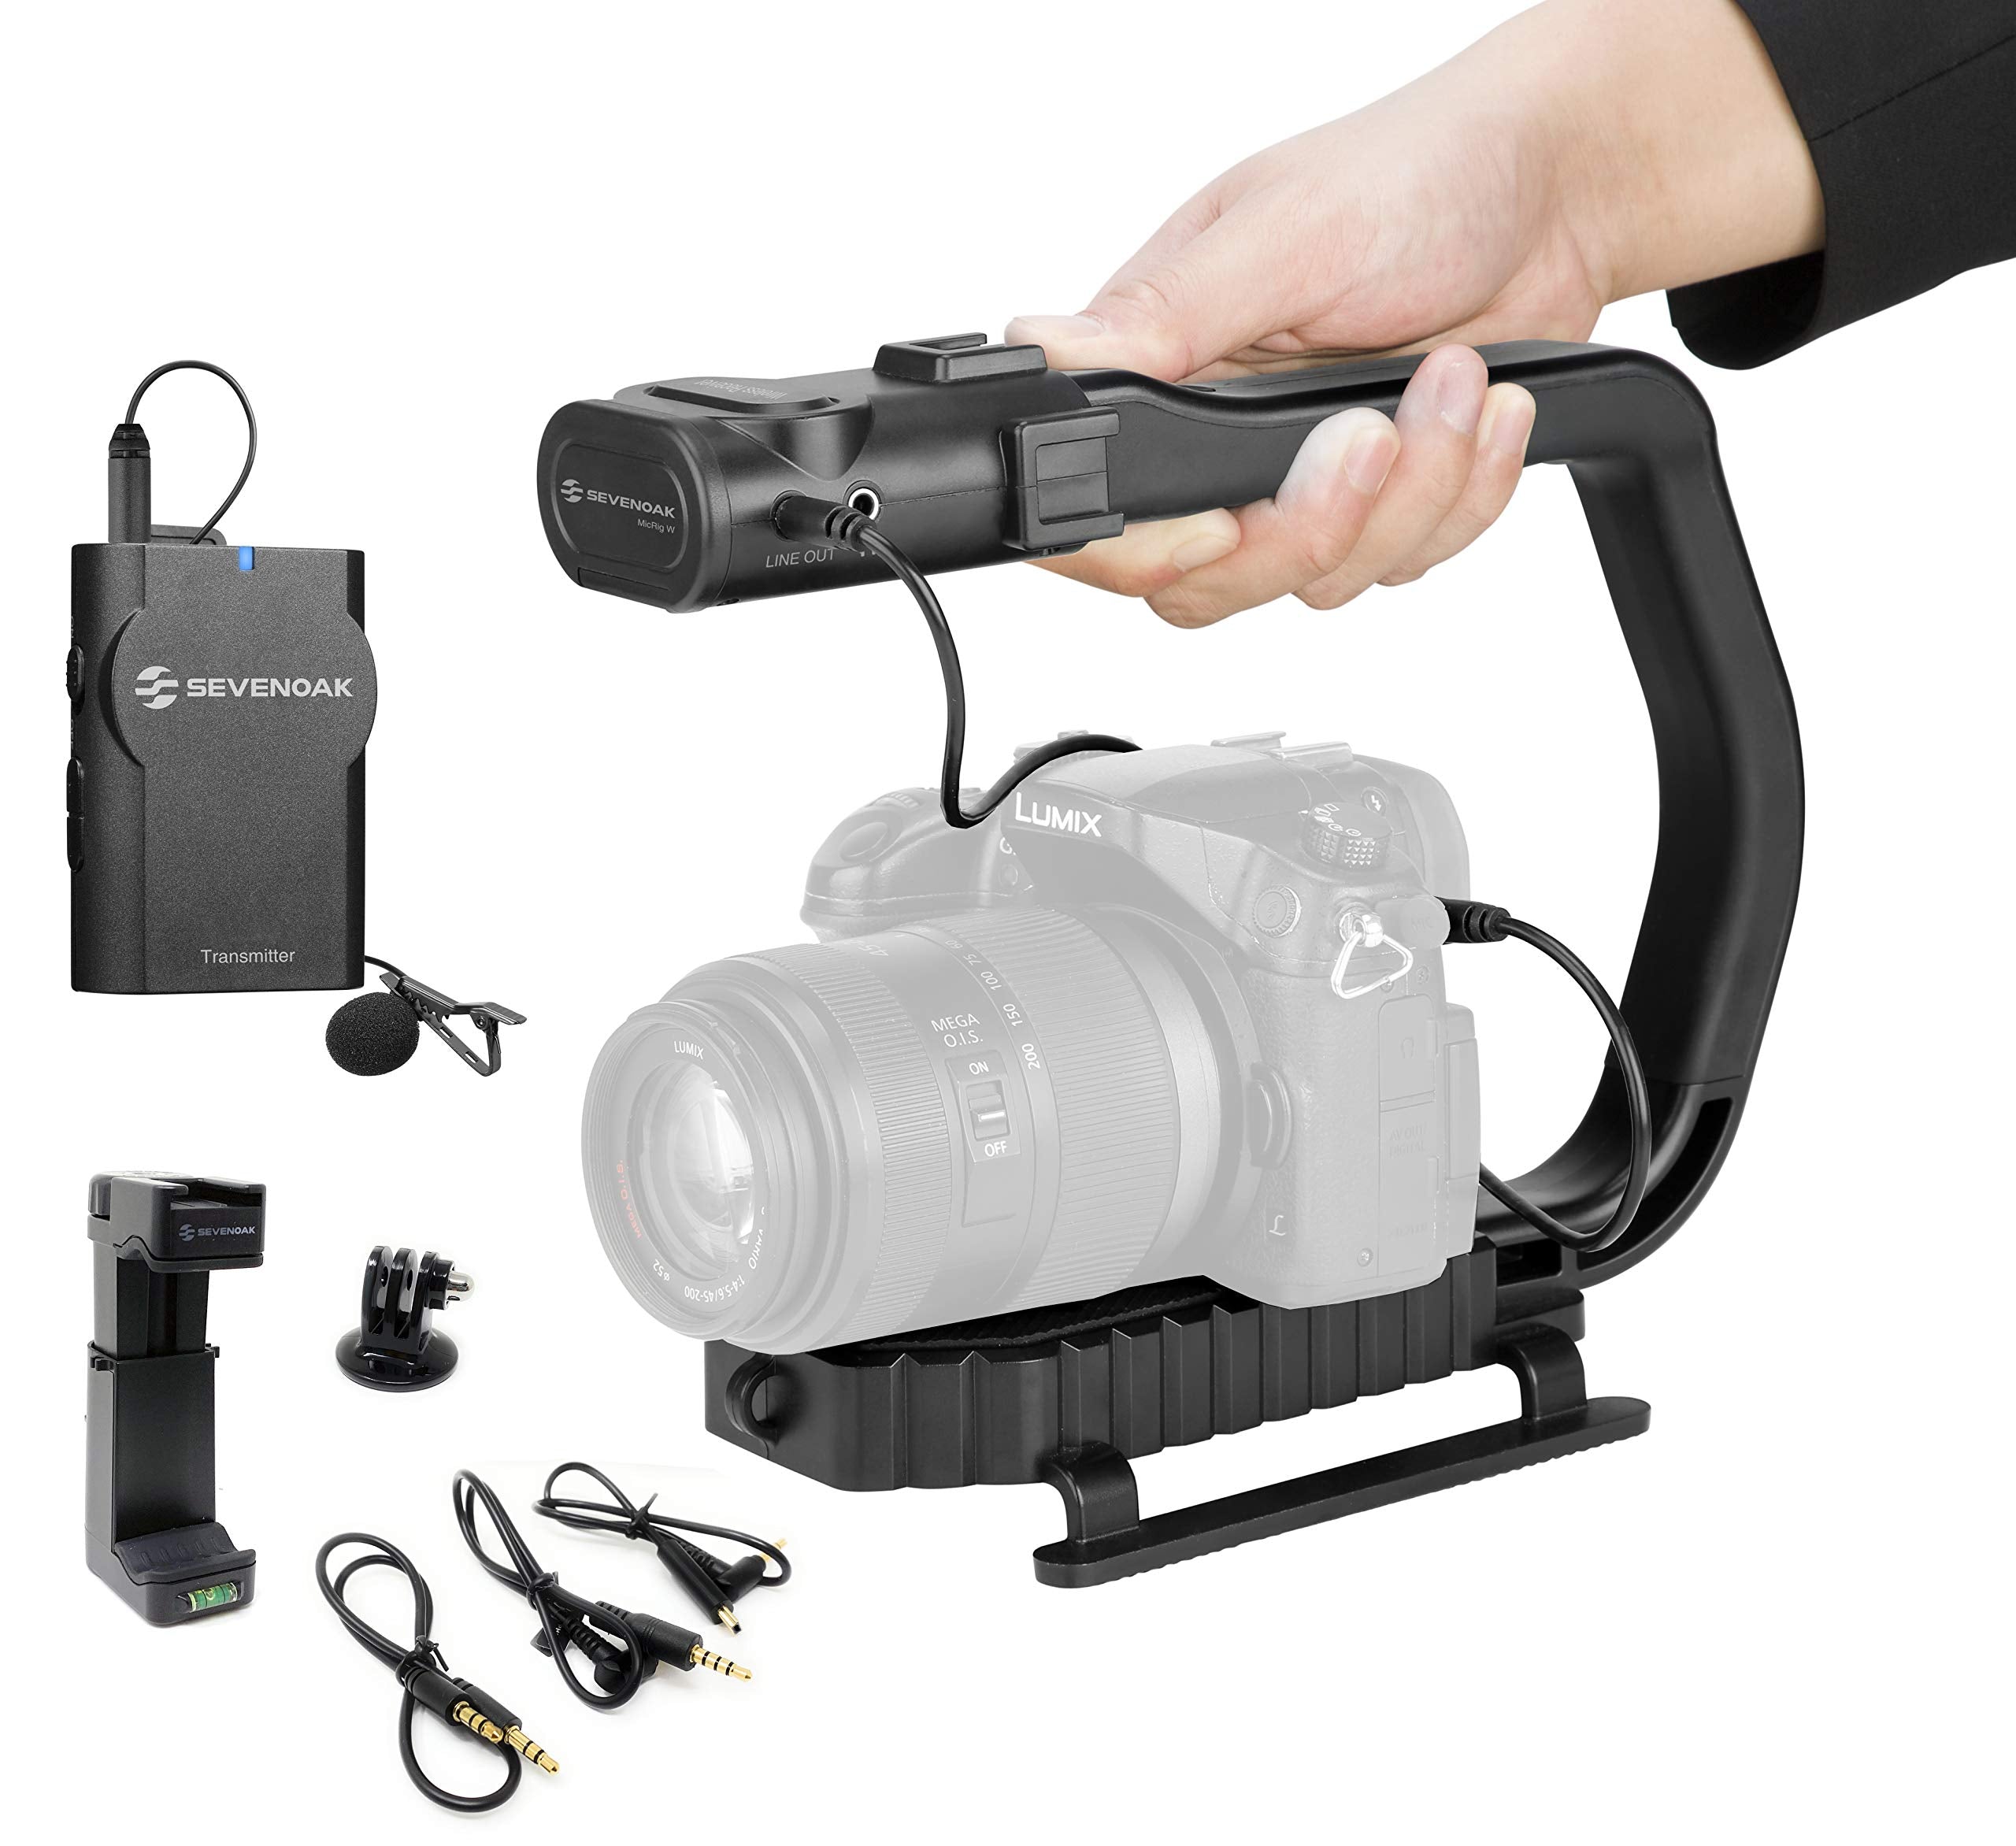 Movo MicRig-W1 Wireless Microphone Filmmaker Kit - Video Handle Stabilizer with Built-in Wireless Lavalier Microphone Compatible with Canon EOS, Nikon, Sony, Panasonic DSLR and Mirrorless Cameras  - Very Good